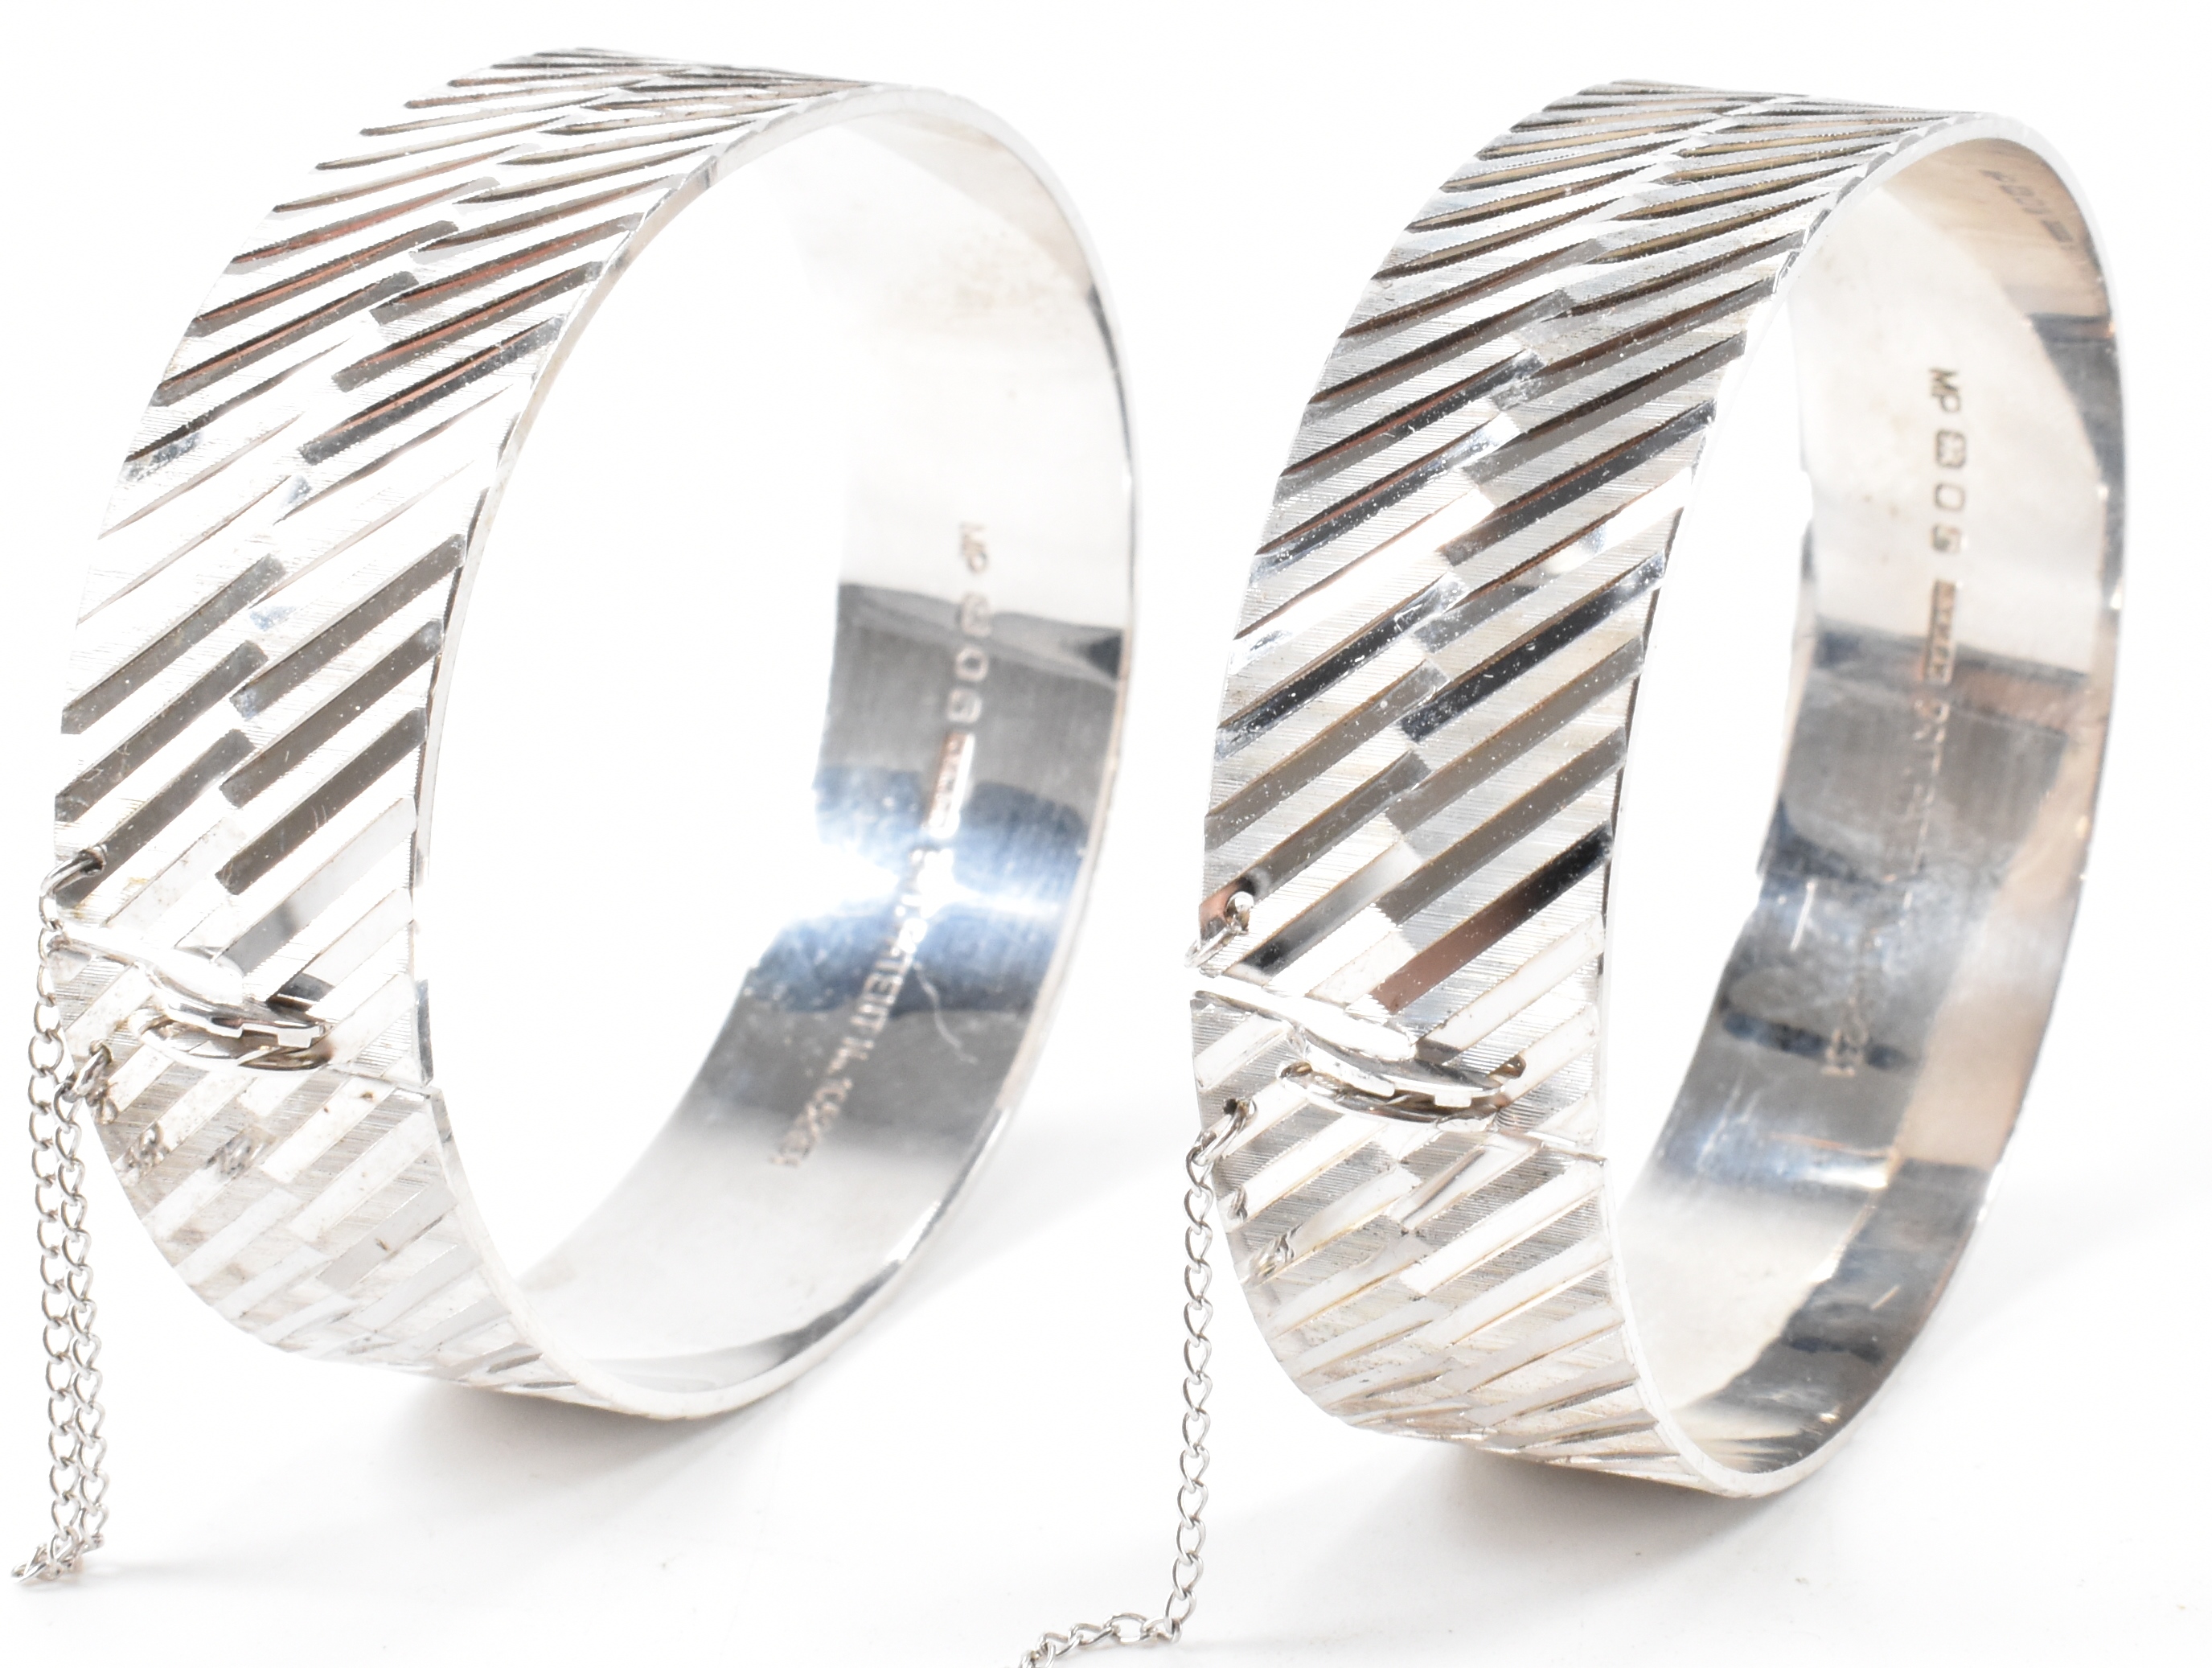 PAIR 1970S HALLMARKED SILVER BANGLES - Image 6 of 6